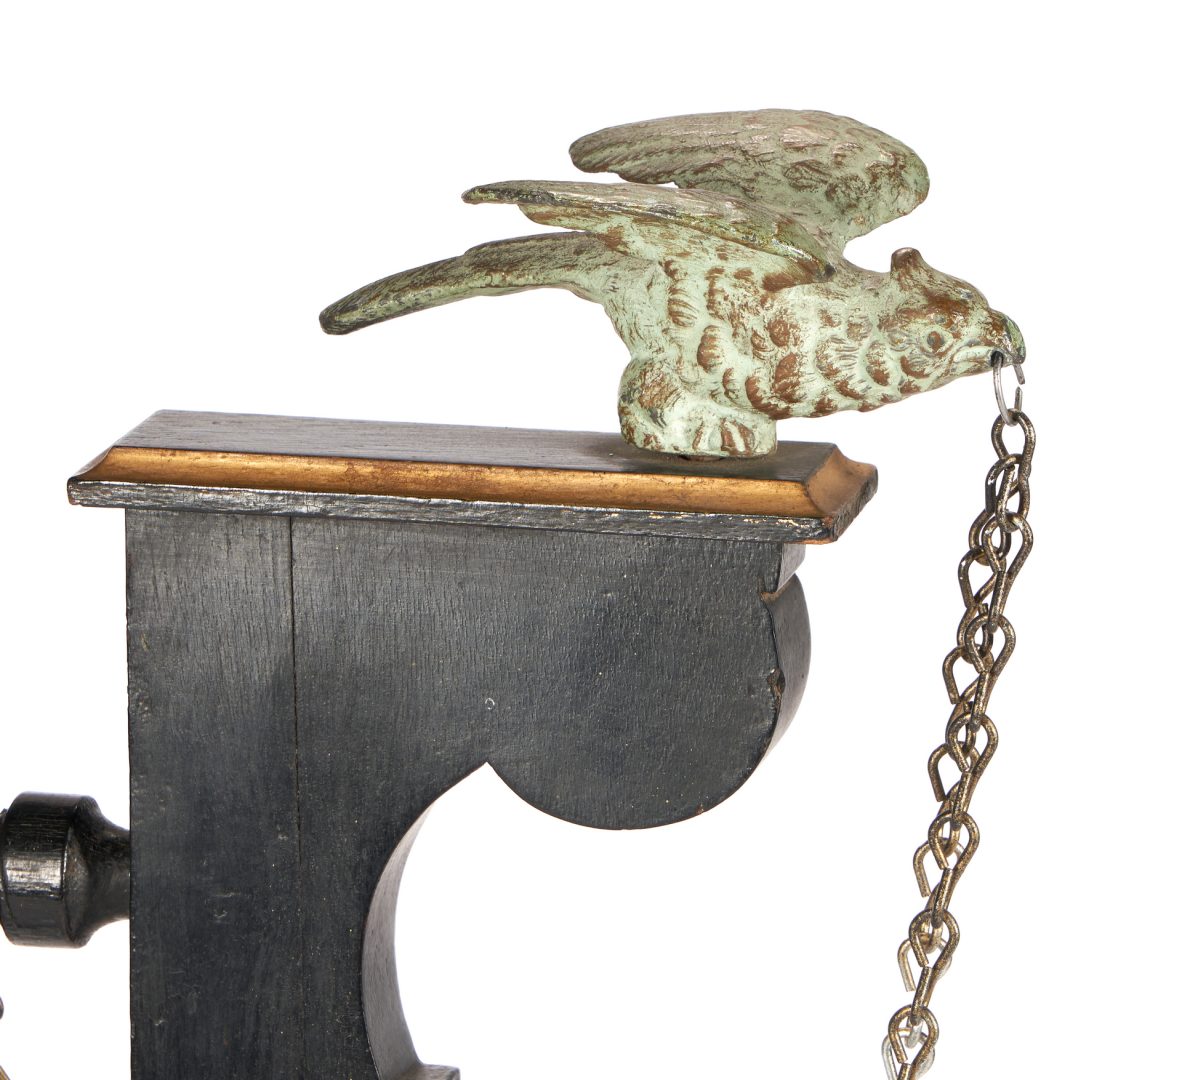 Lot 536: American Aesthetic Movement Fern Stand, Eagle Finials